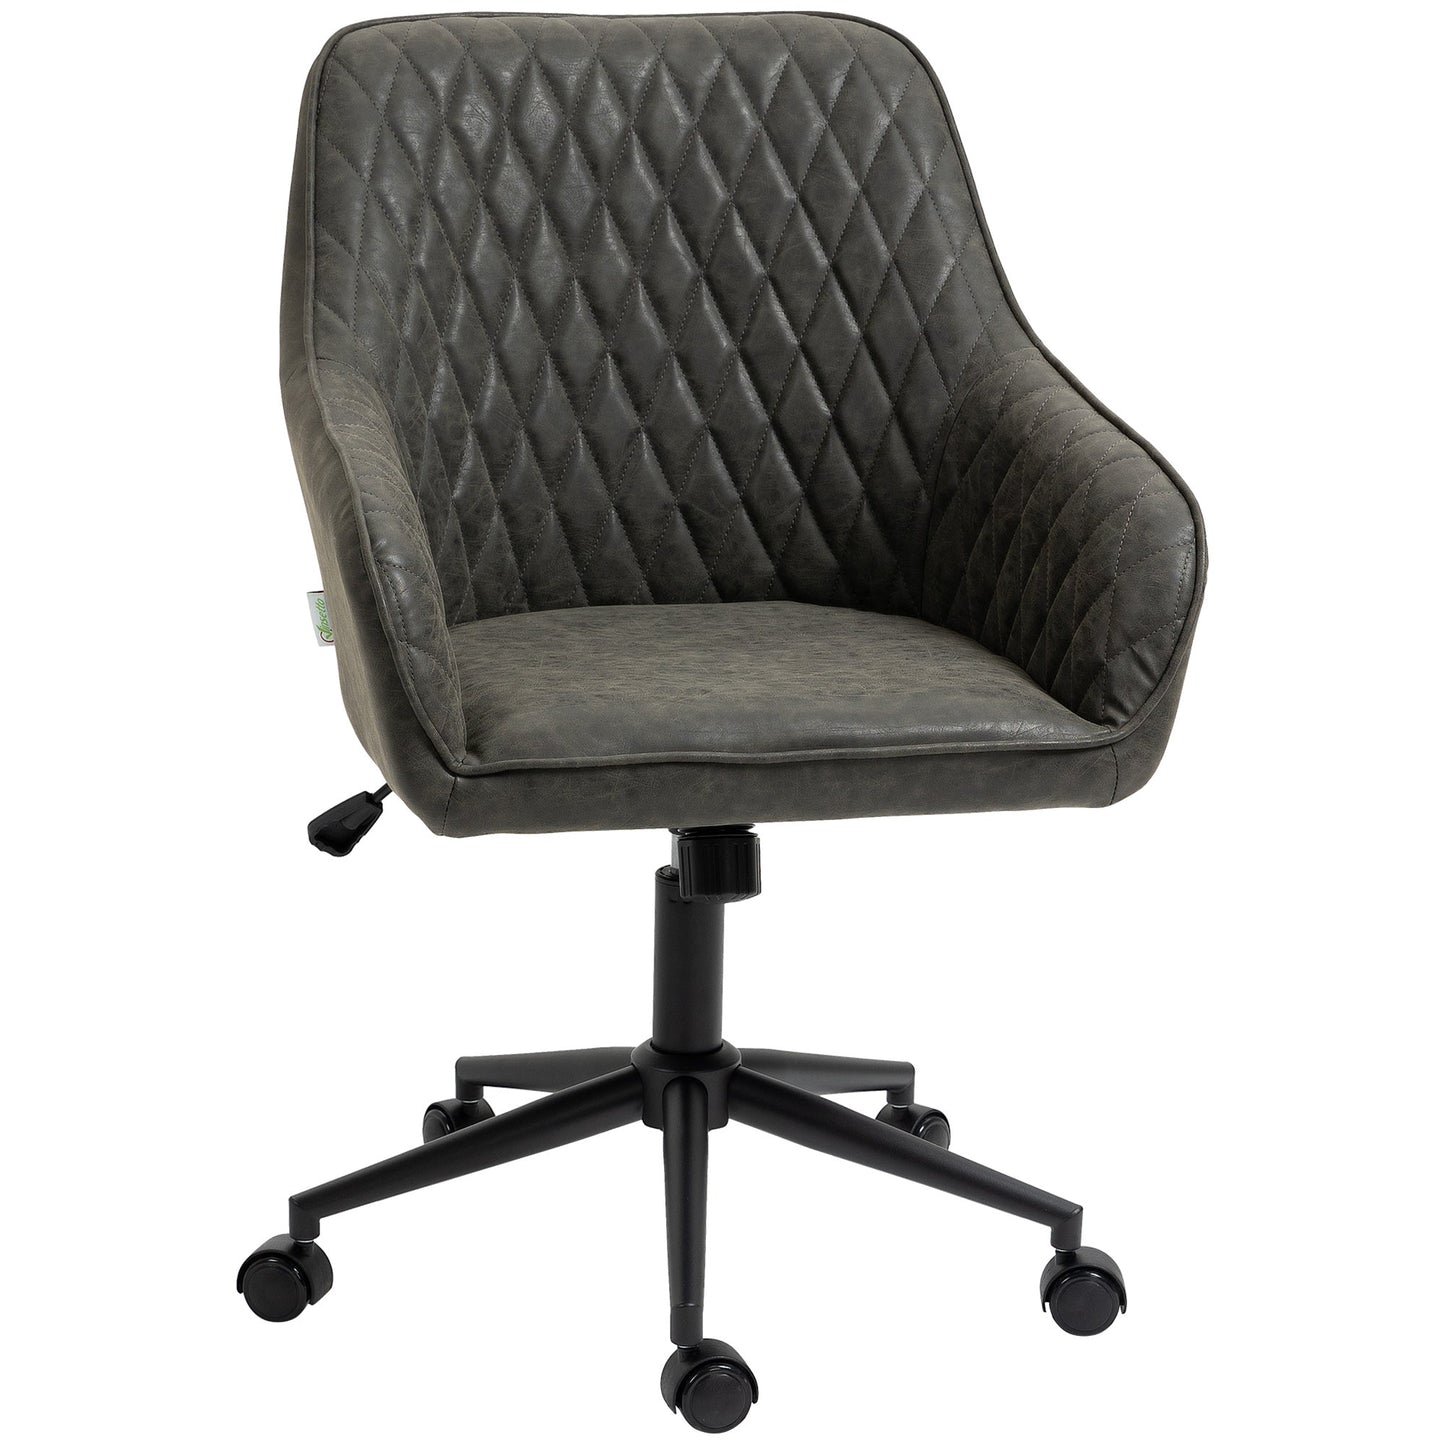 Reclinable office chair with adjustable height, PU leather, rubber and steel, 59x60x90-100 cm, Grey